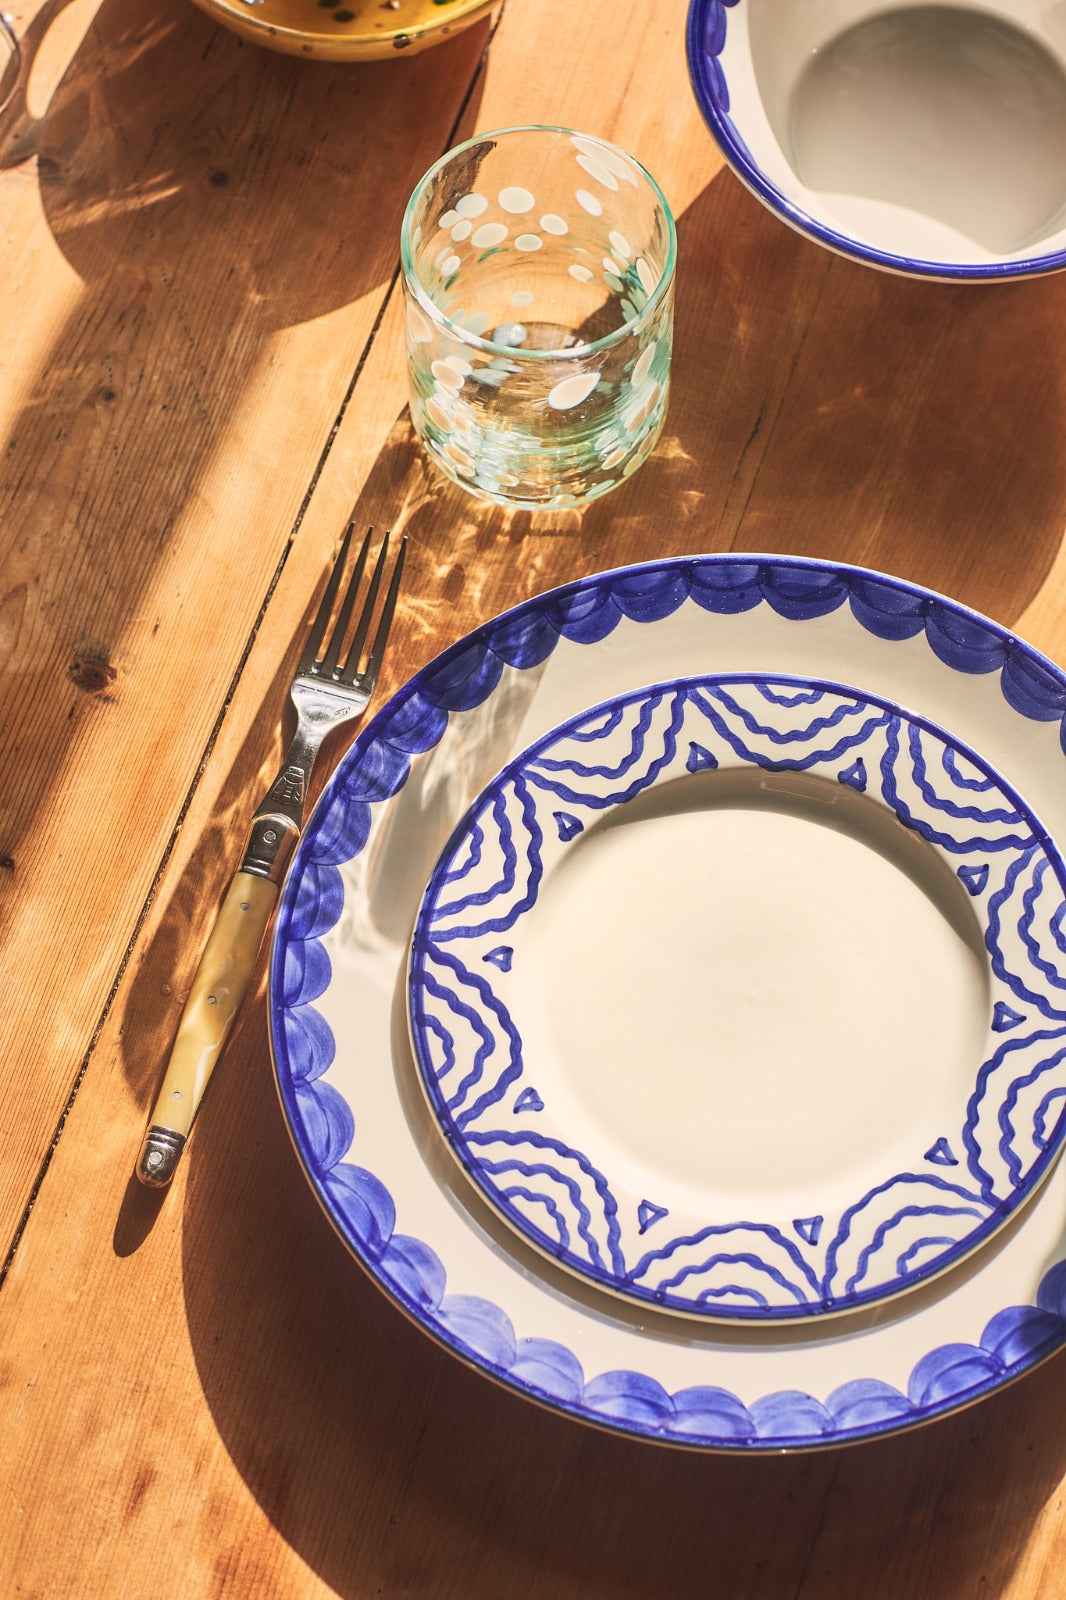 Late Afternoon Dinnerware Plates and Bowls